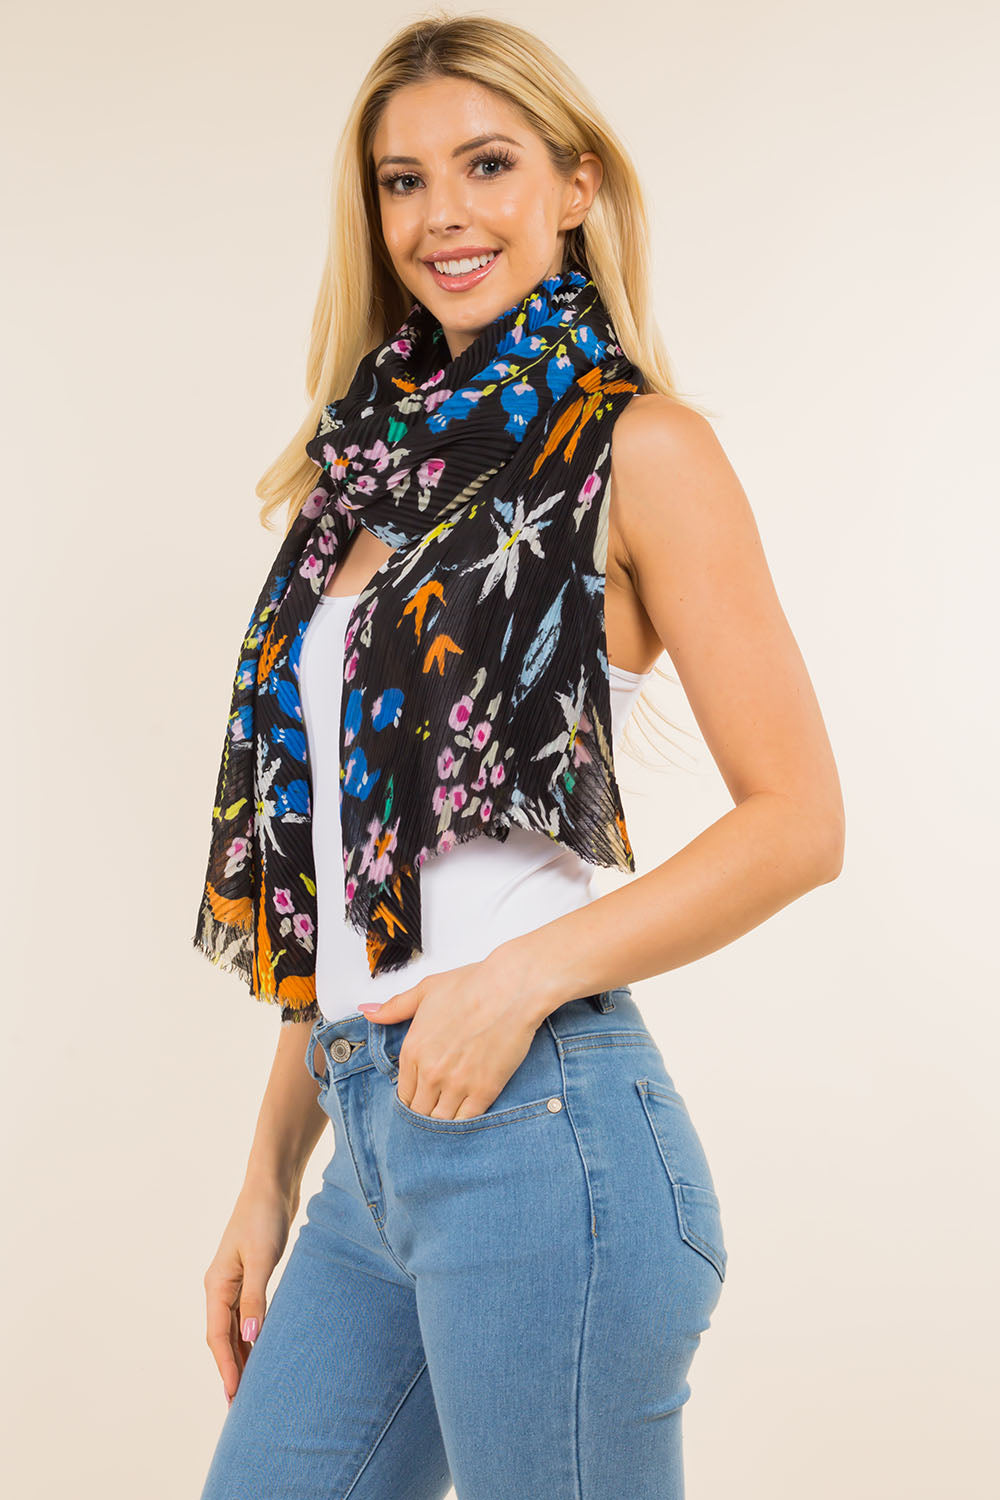 GPO-4131 colorful floral design scarf